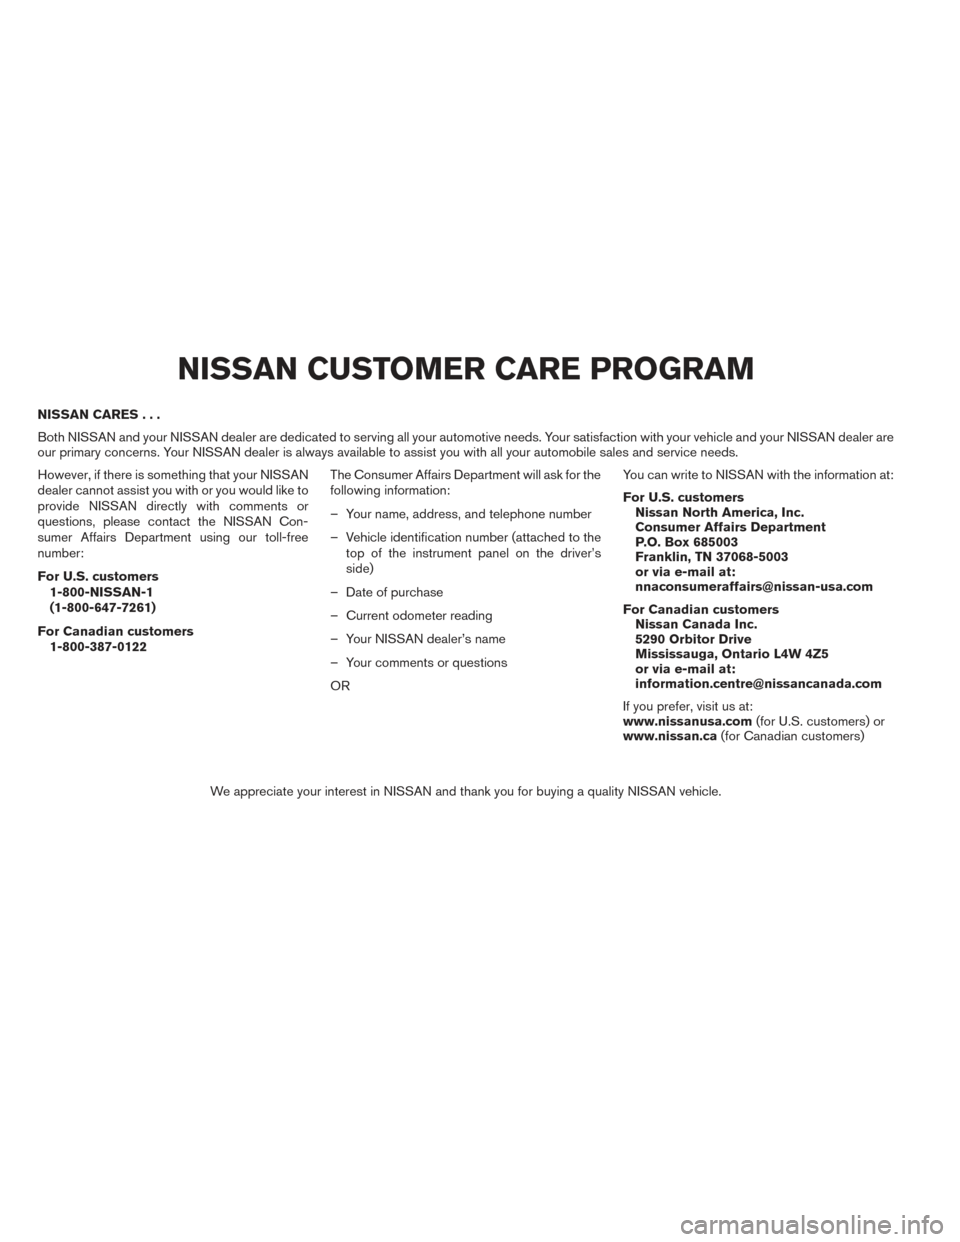 NISSAN PATHFINDER HYBRID 2014 R52 / 4.G Manual Online NISSAN CARES...
Both NISSAN and your NISSAN dealer are dedicated to serving all your automotive needs. Your satisfaction with your vehicle and your NISSAN dealer are
our primary concerns. Your NISSAN 